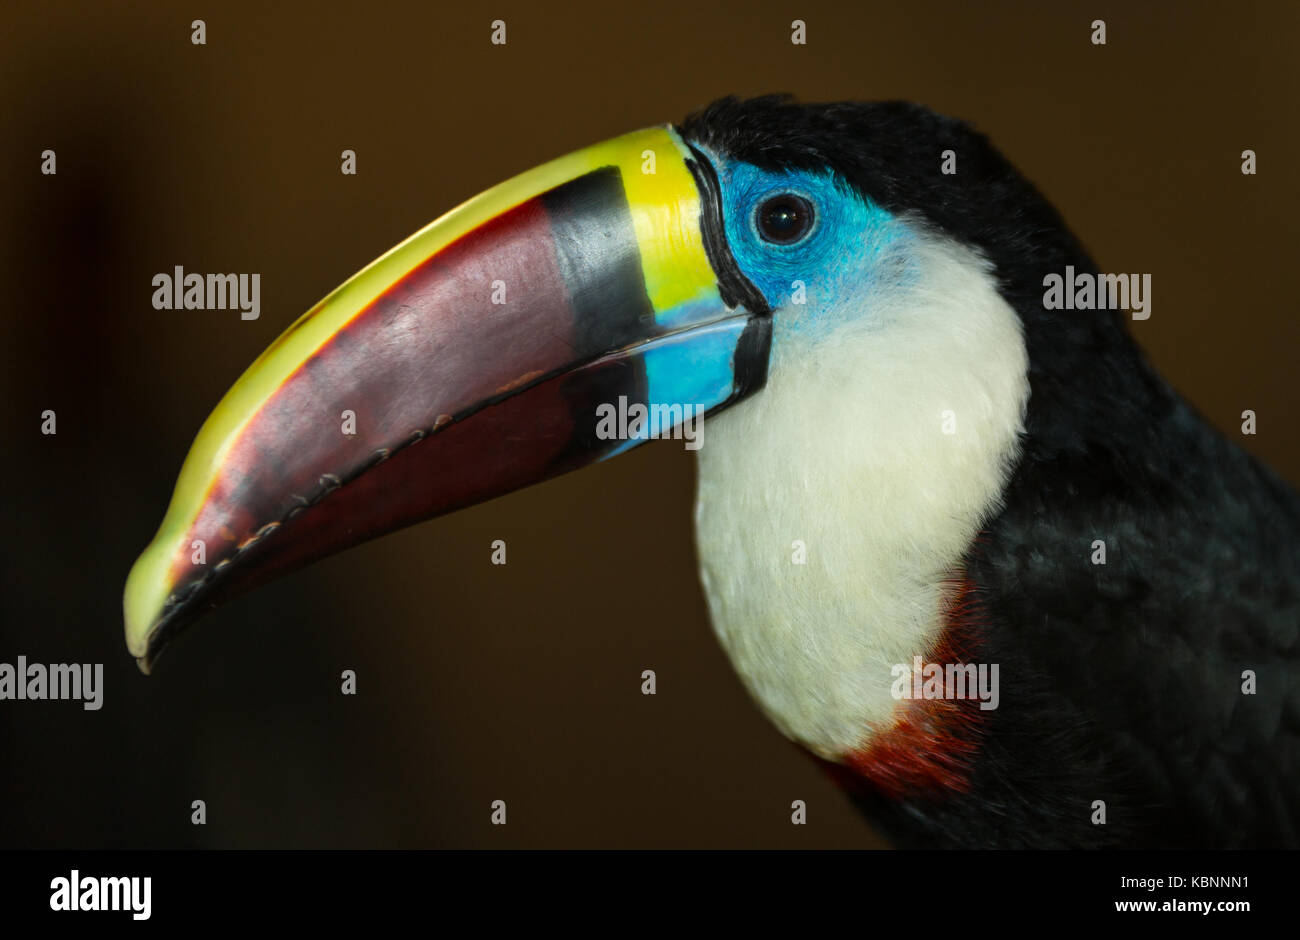 Toucan portrait showing beak and head with blurred background Stock Photo